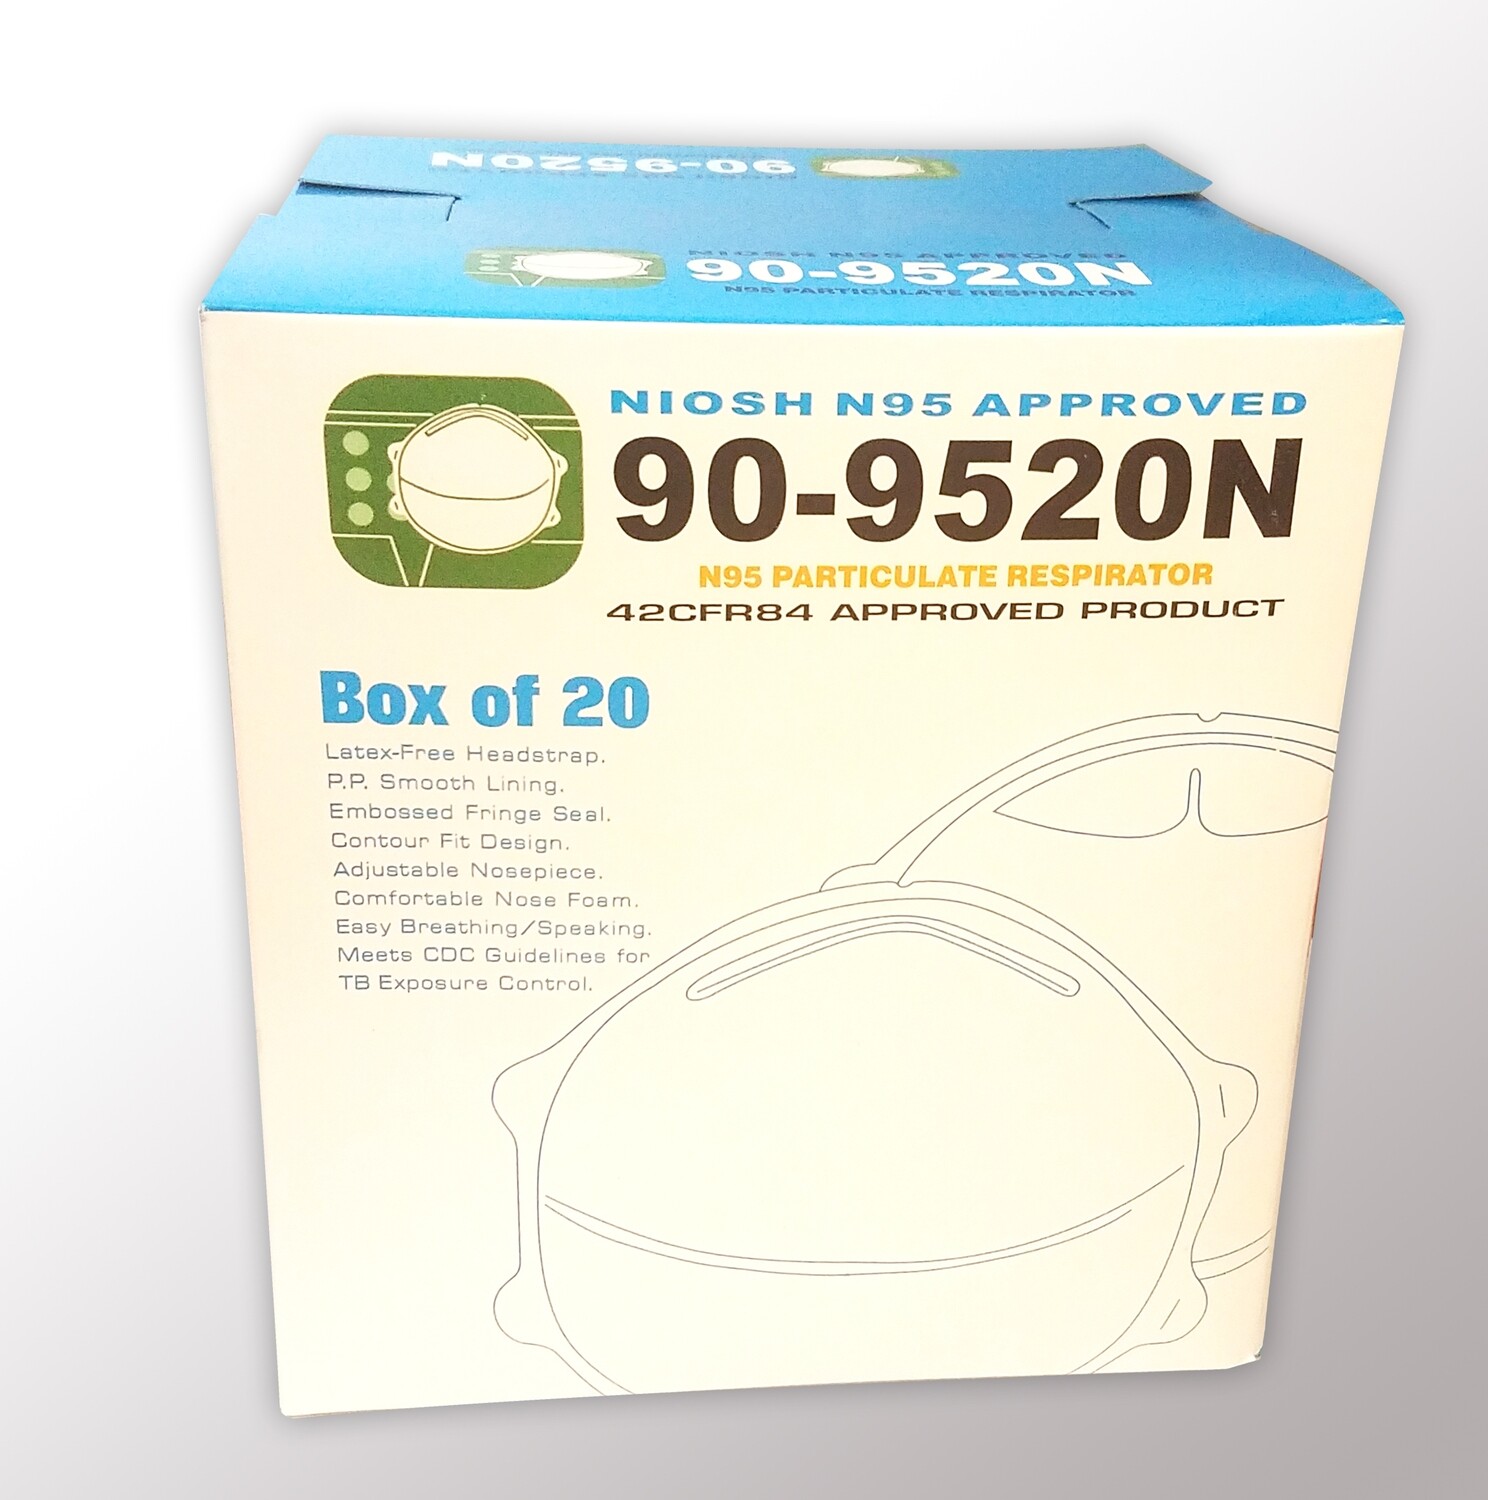 N95 Face Mask
20 PIECE BOX